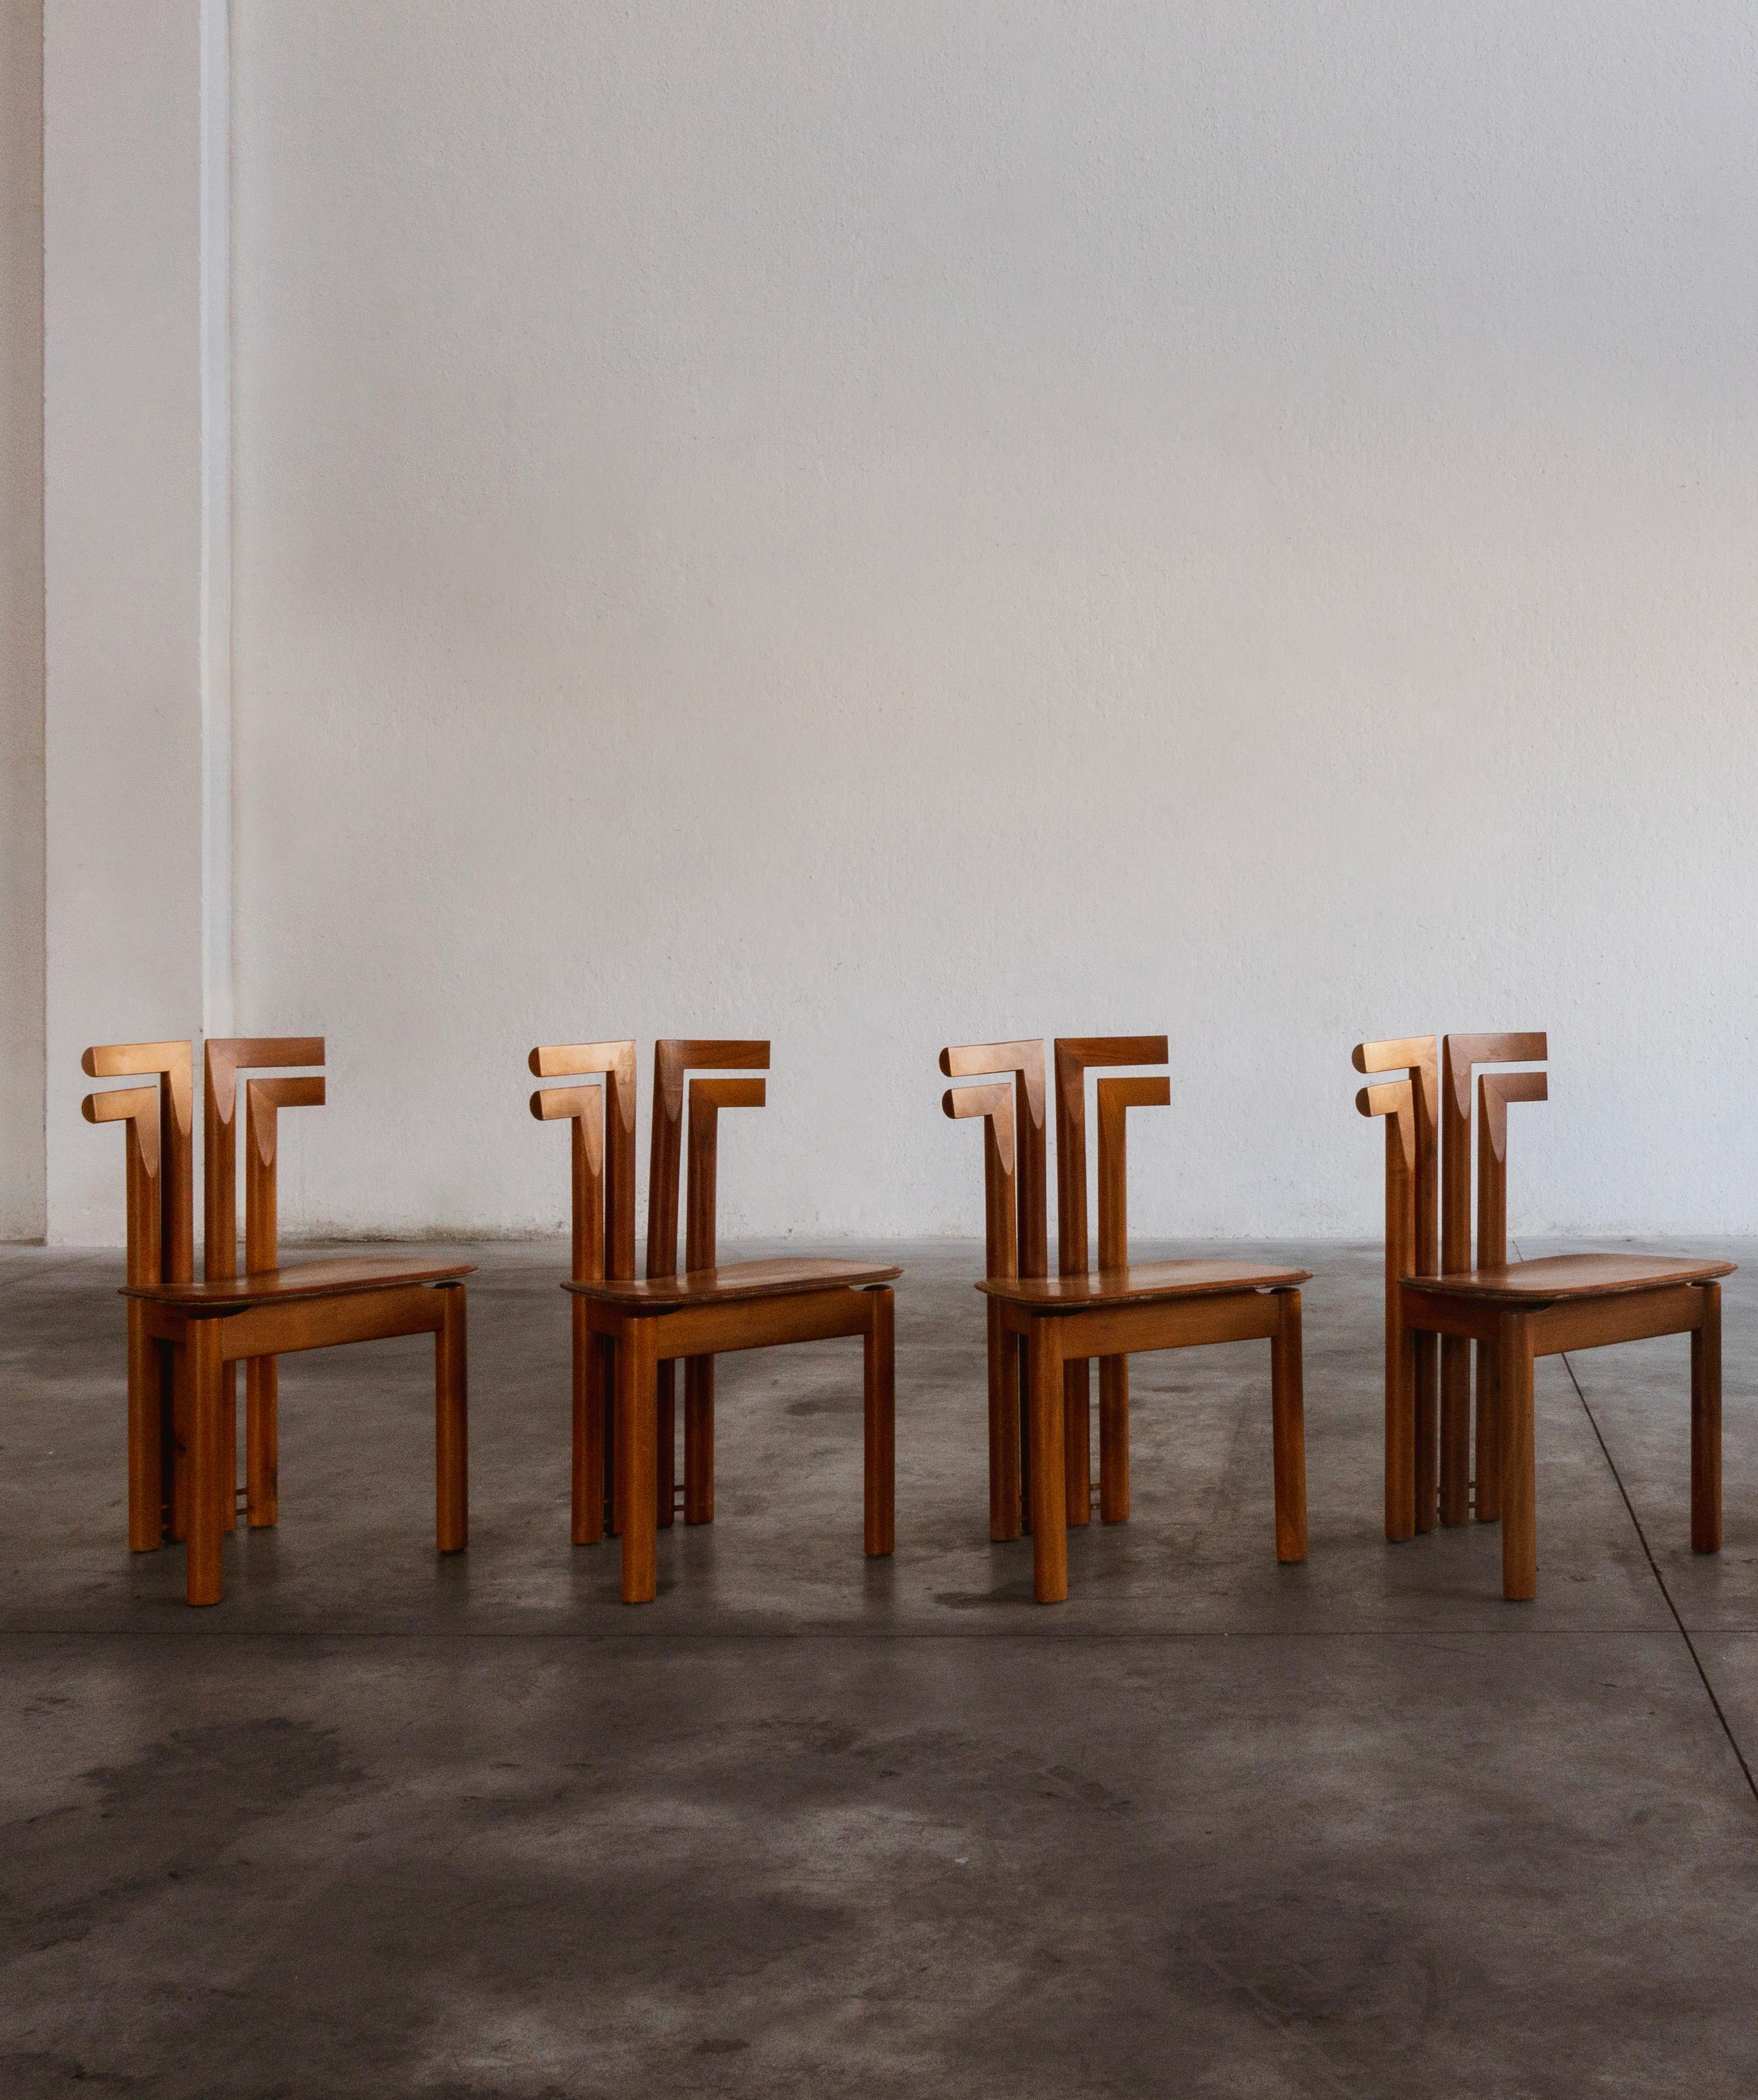 Mario Marenco “Sapporo” dining chairs for Mobil Girgi, beech and leather, Italy, 1970, set of four

A rare variant of the iconic Marenco’s “Sapporo” chair, this version shows a strong personality and this is immediately recognizable, with some